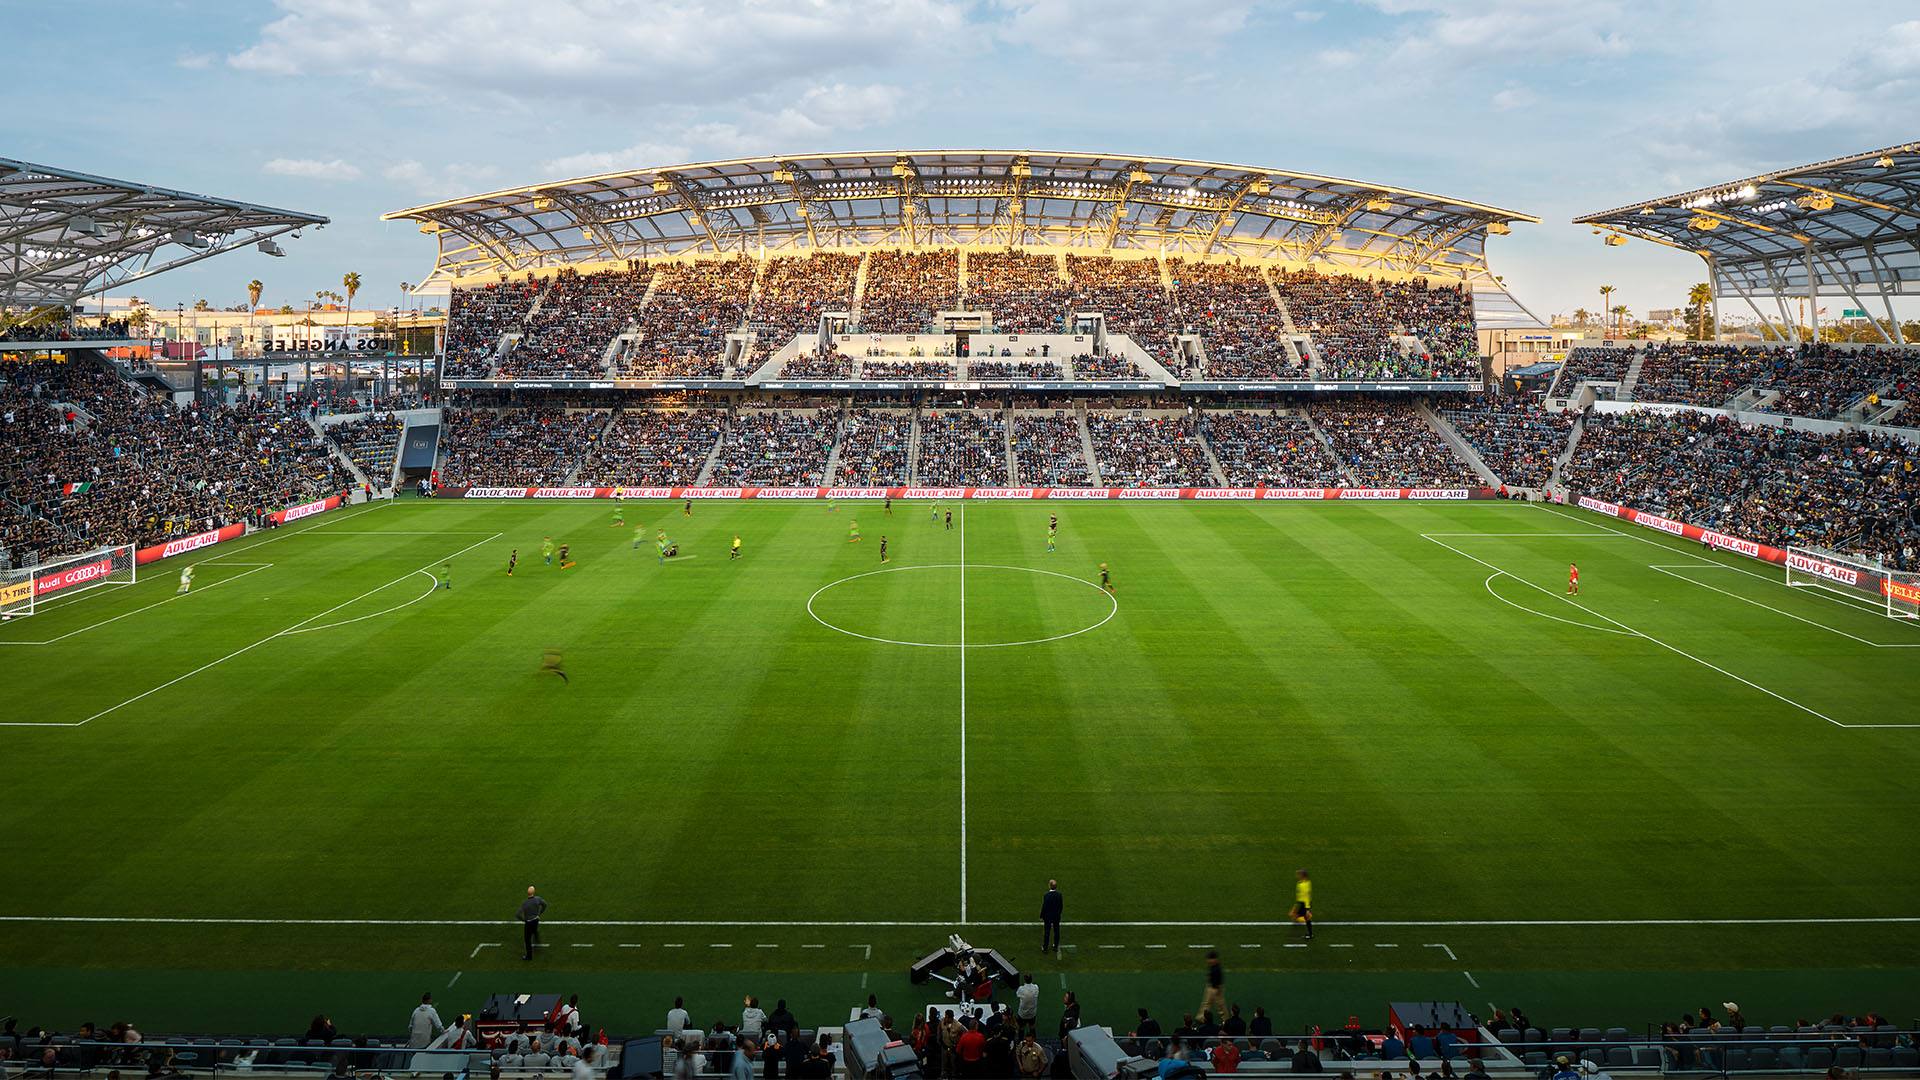 The Ultimate Guide to LAFC Match Day. Discover Los Angeles